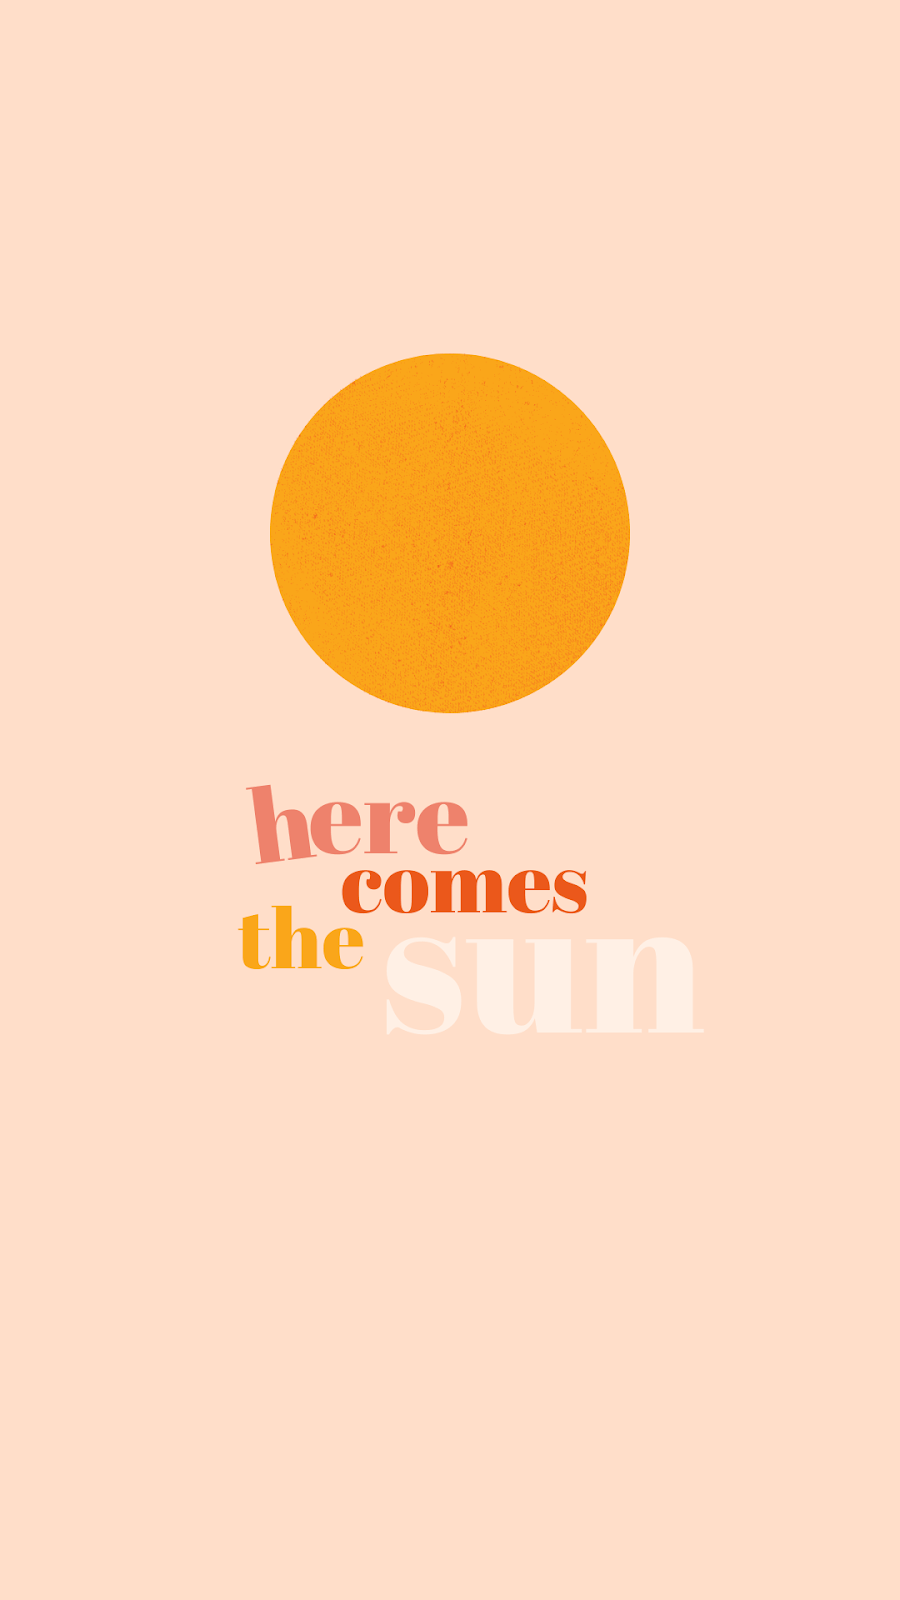 A poster that says here comes the sun - Sun